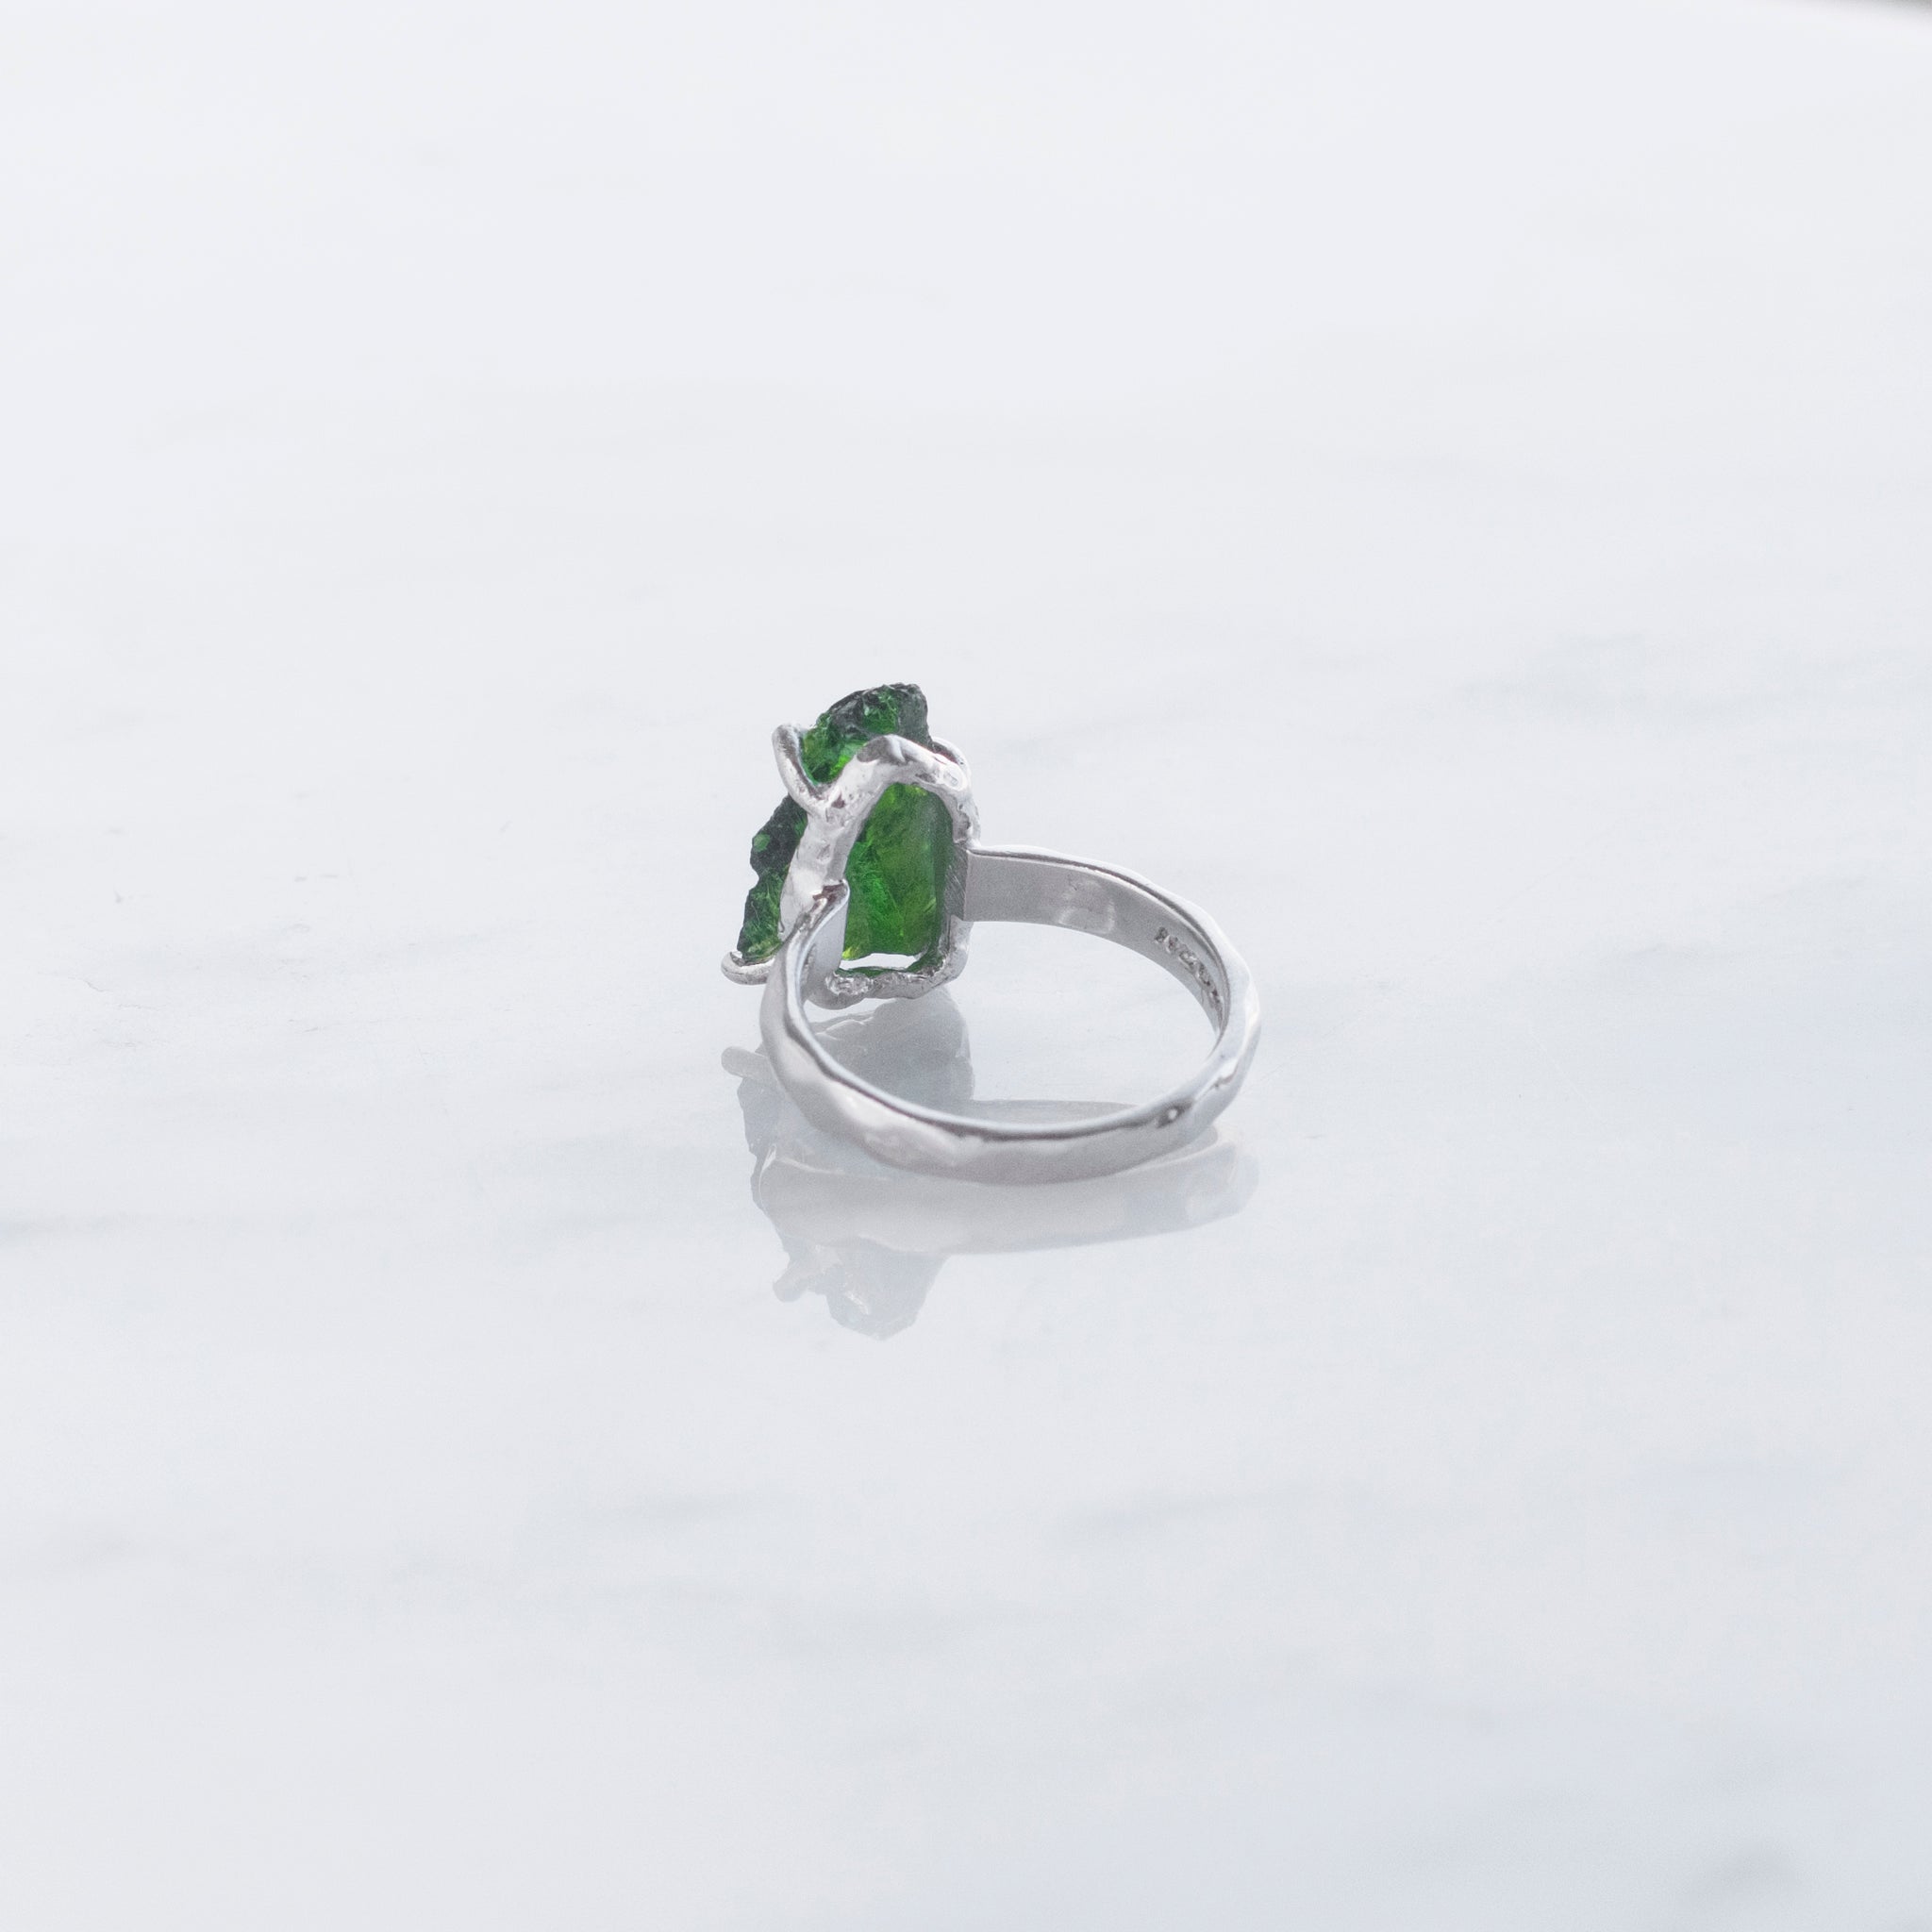 Chrome Diopside Rough Crystal Ring